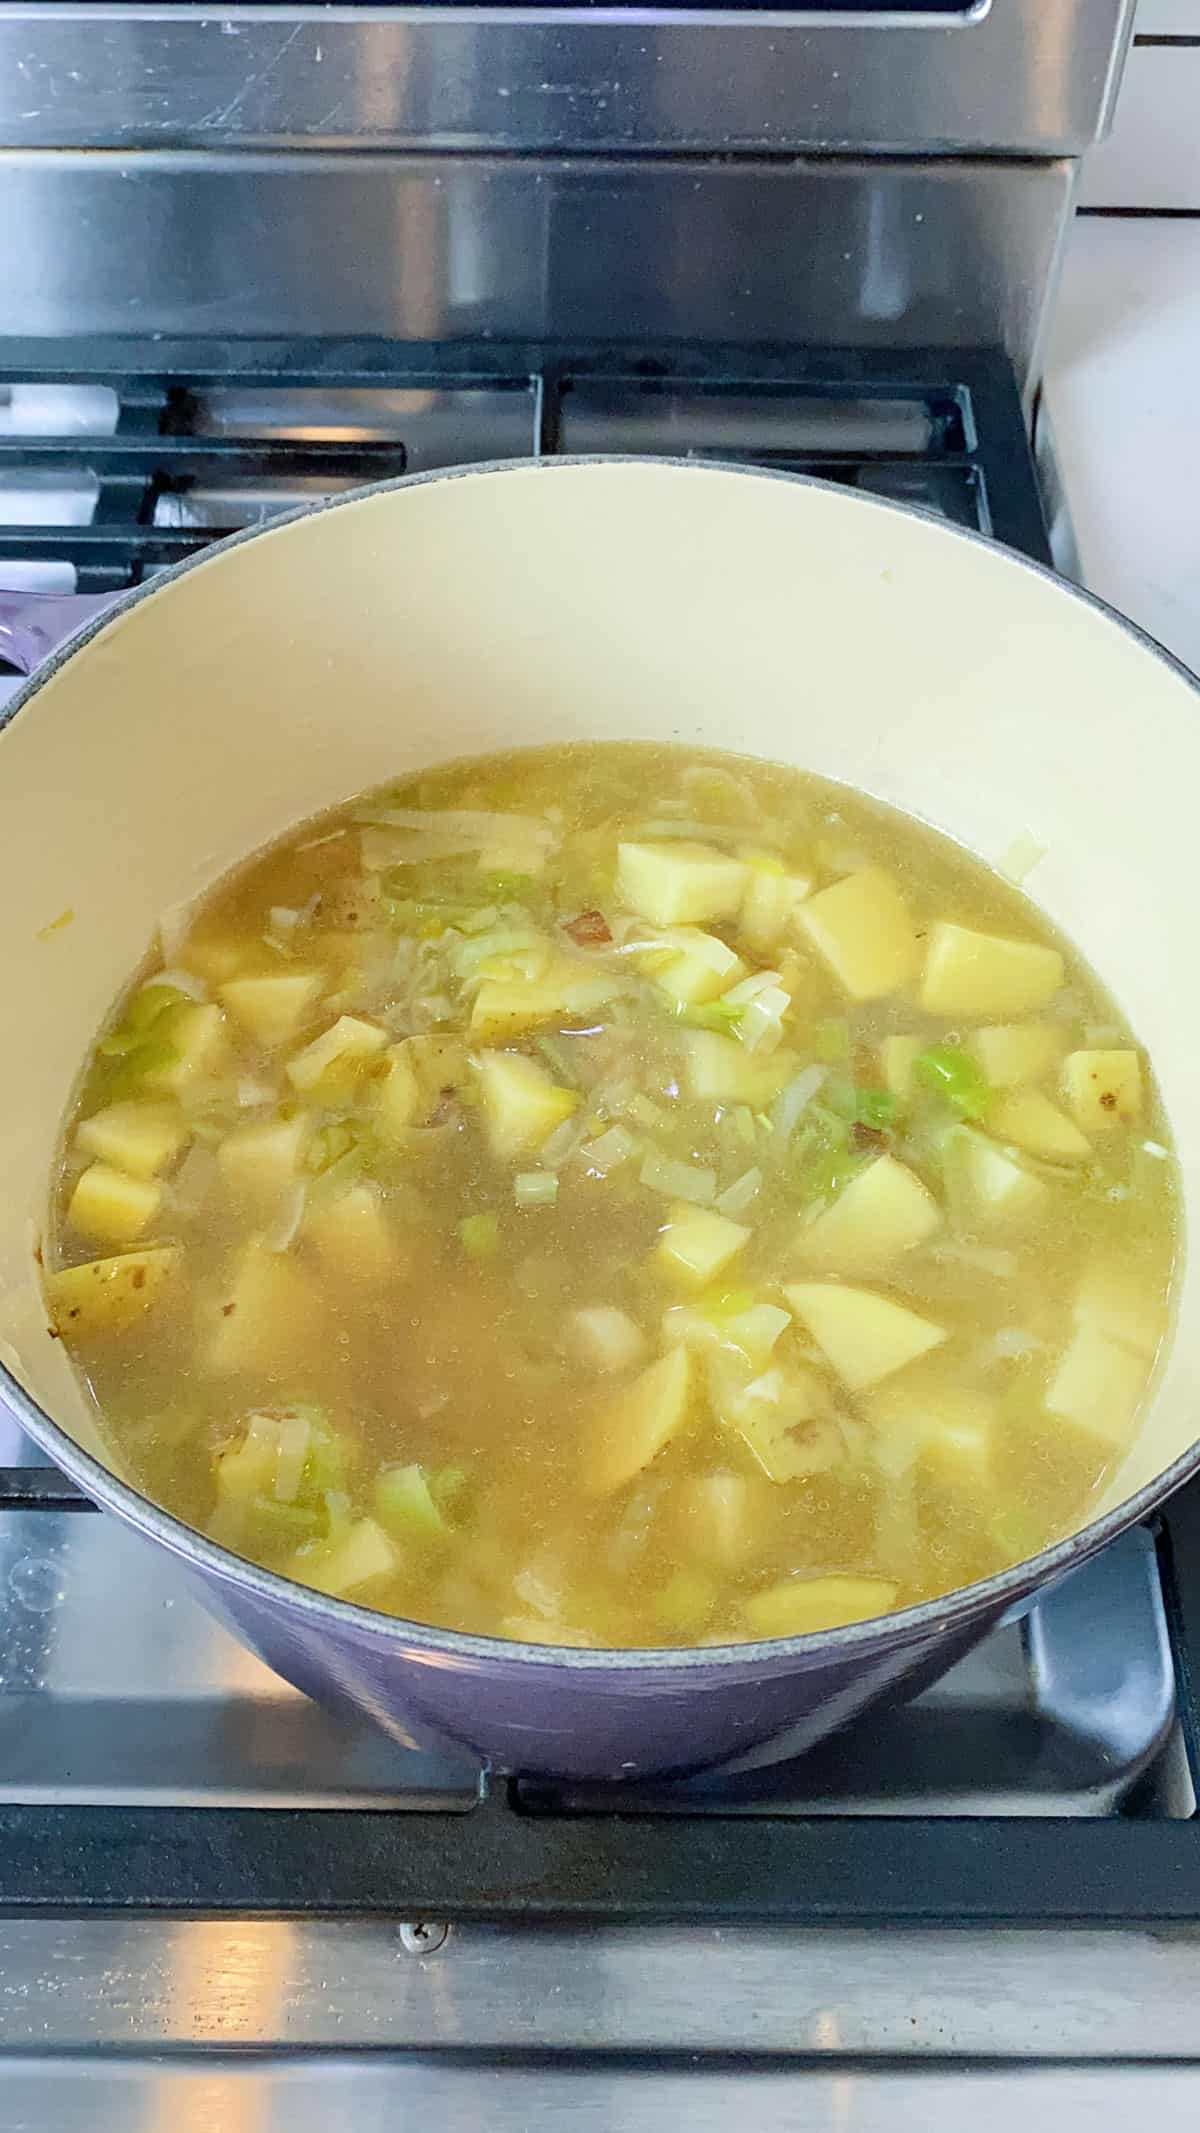 Add enough vegetable stock to cover all of the potatoes and leeks.